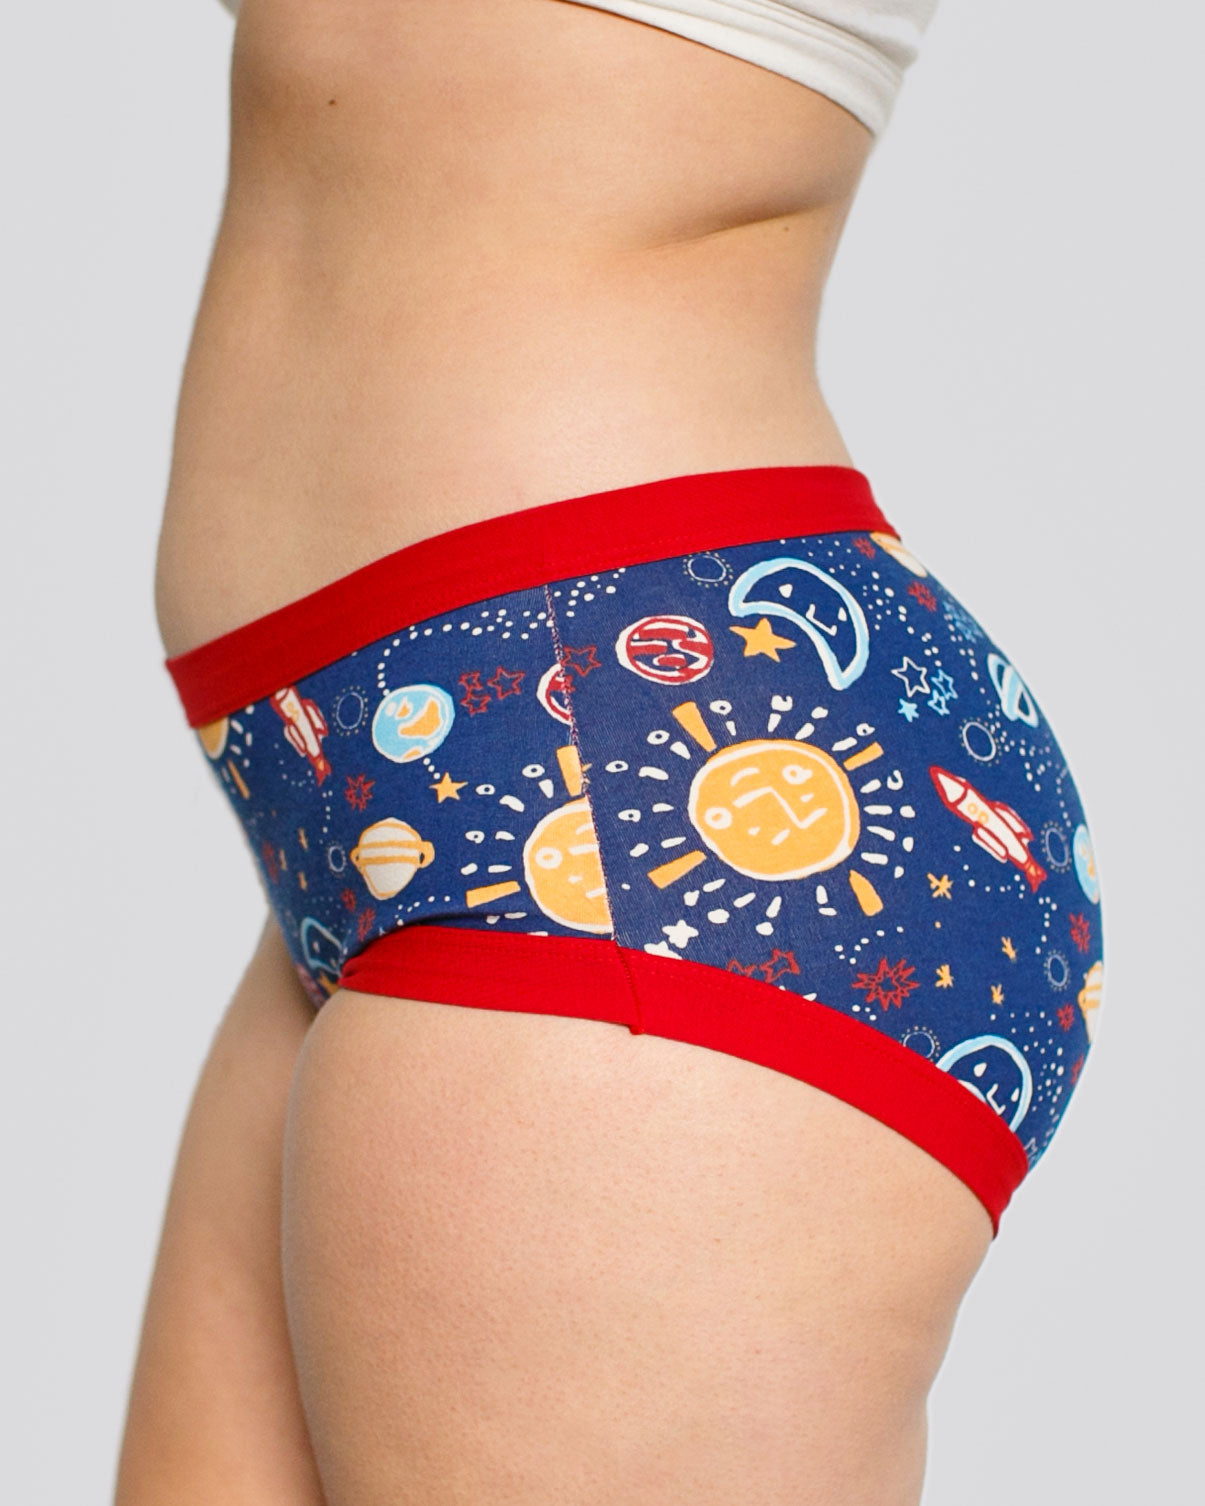 Model's side wearing Thunderpants organic cotton Hipster style underwear in a sun, planets, stars, and universe print.